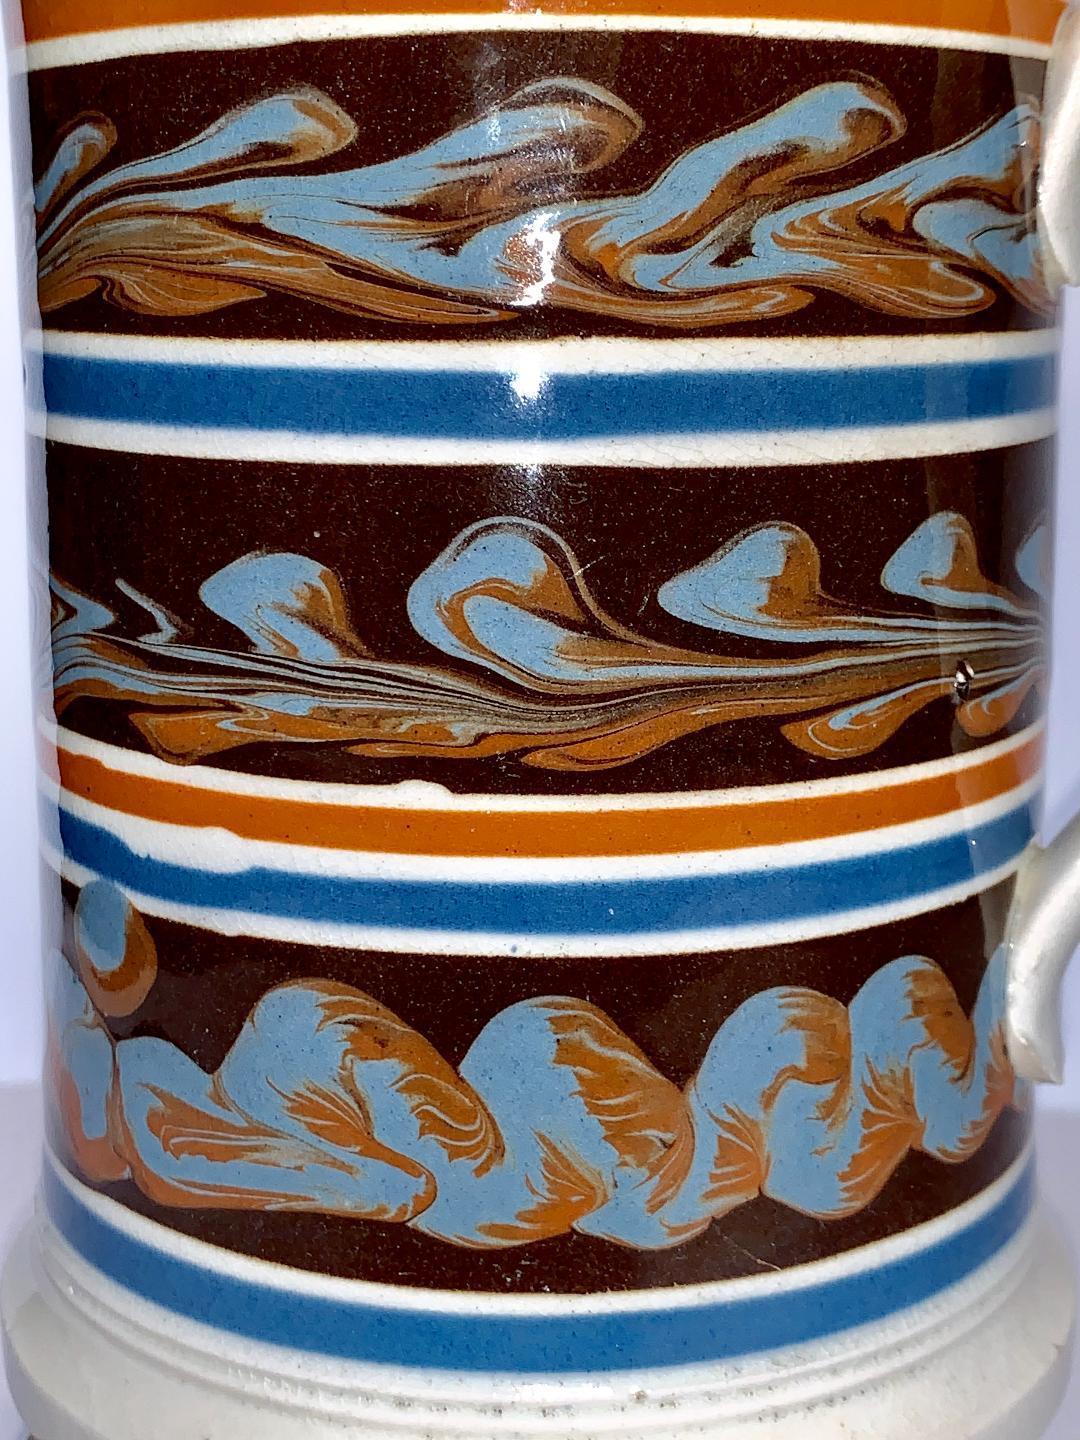 We are excited to offer this quart mocha ware mug made in England, circa 1840.
This mug is decorated with three cables of two colors light blue and light brown on a midnight brown ground. (This is the first time we have had a piece of mocha ware